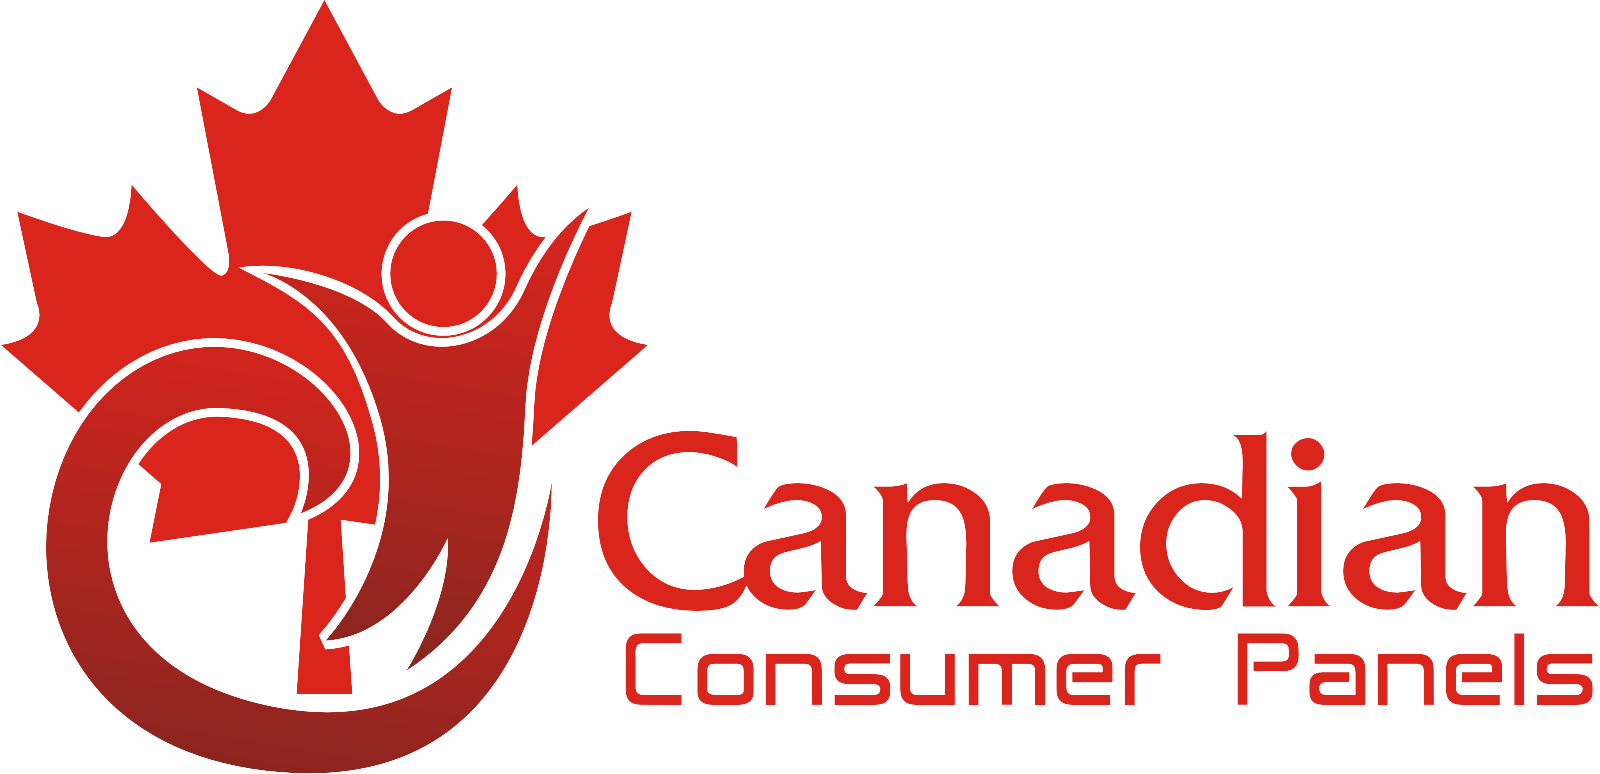 In-Home-Product Tester- Canadian Consumer Panels